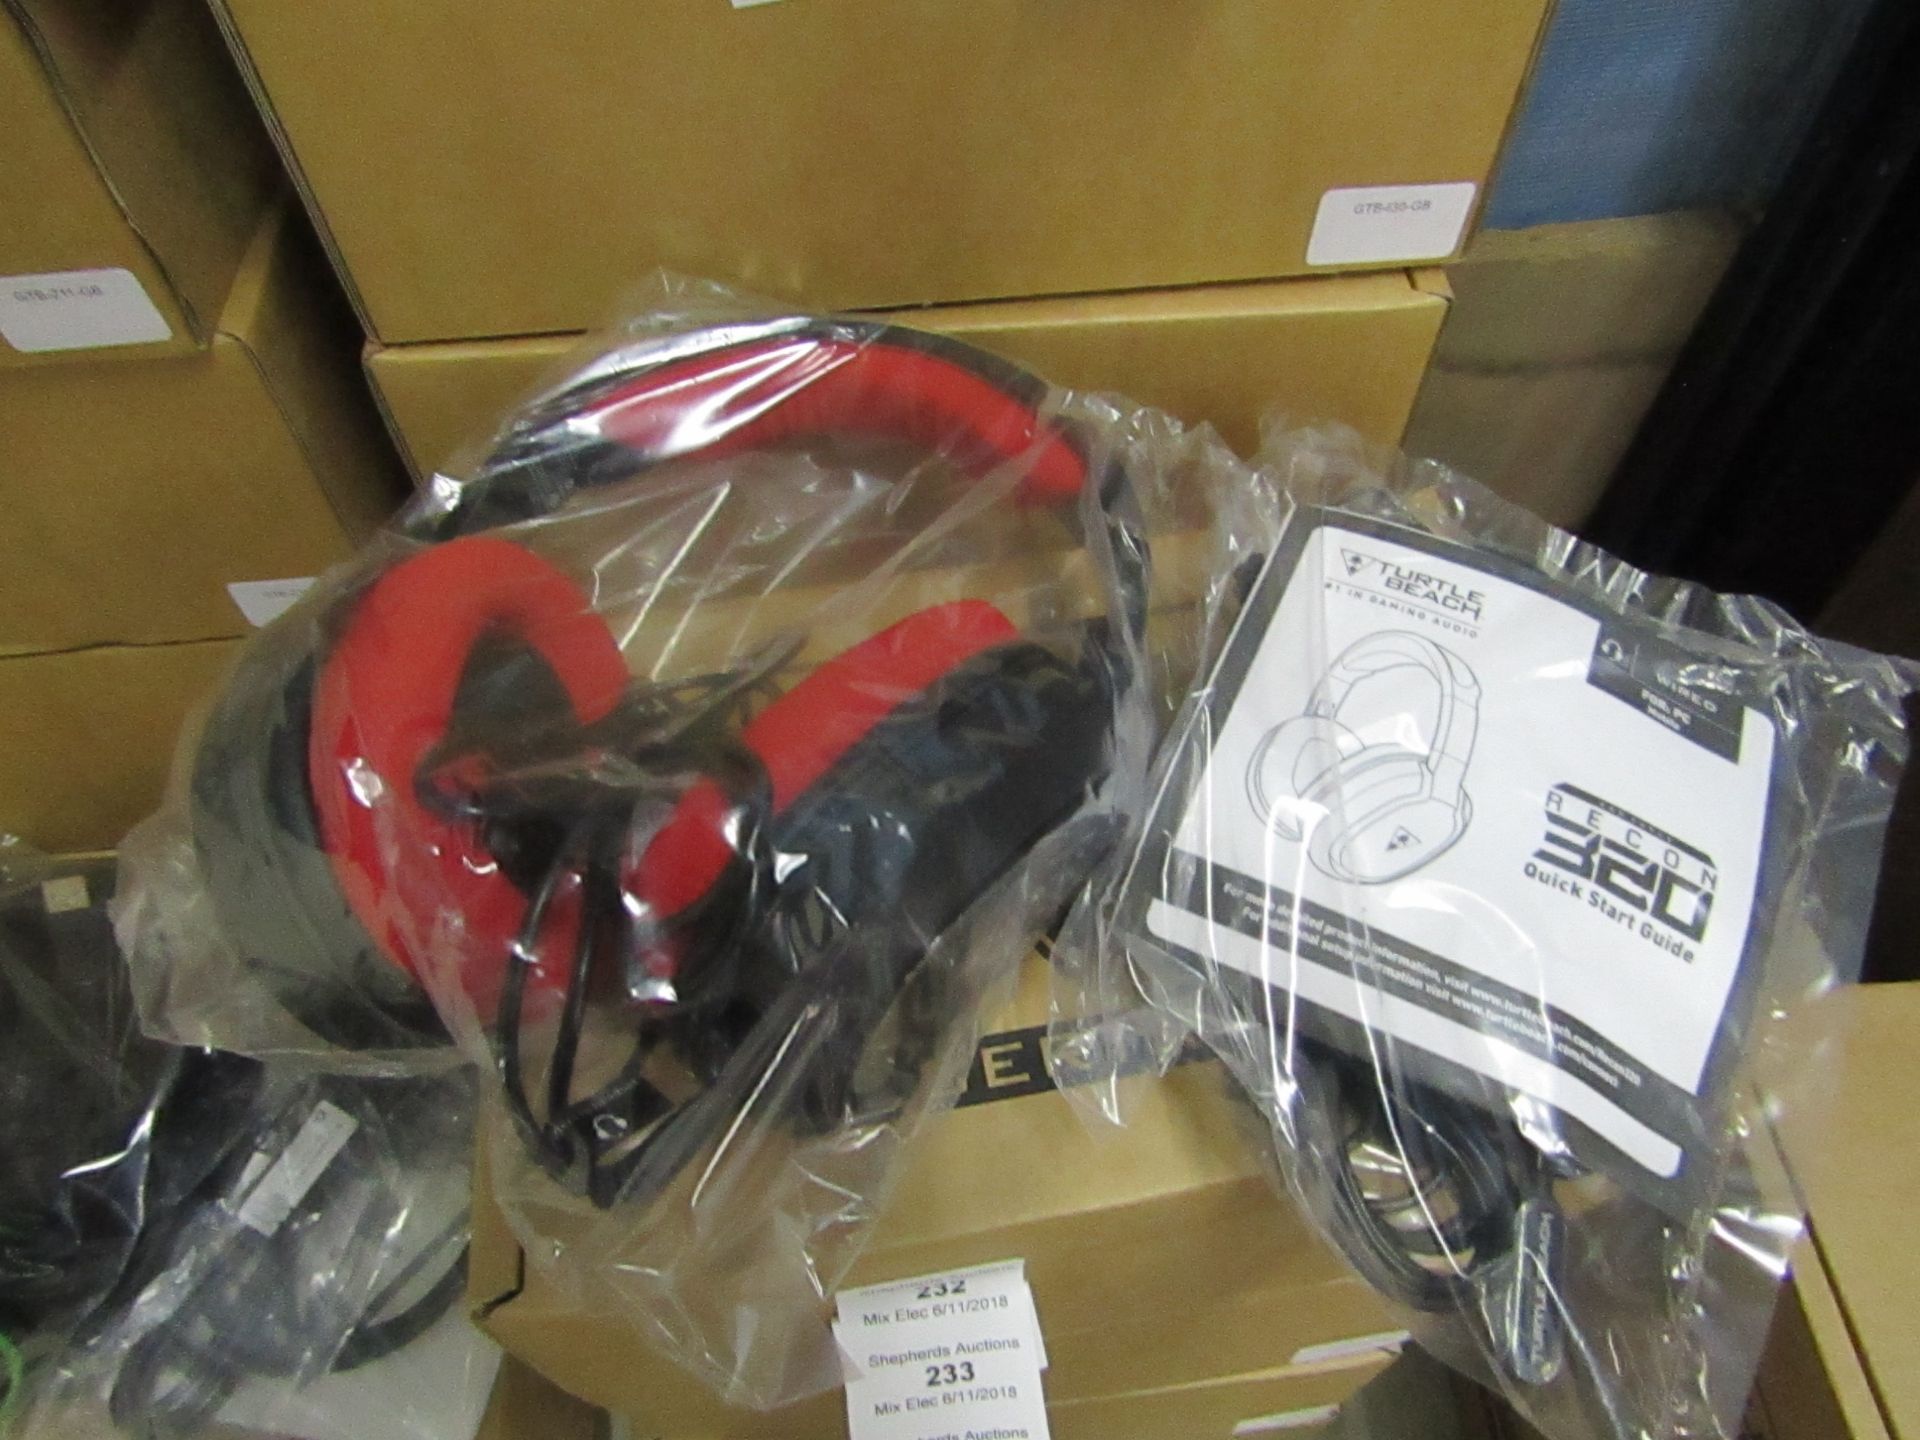 Turtle Beach recon 320 gaming headset, brand new